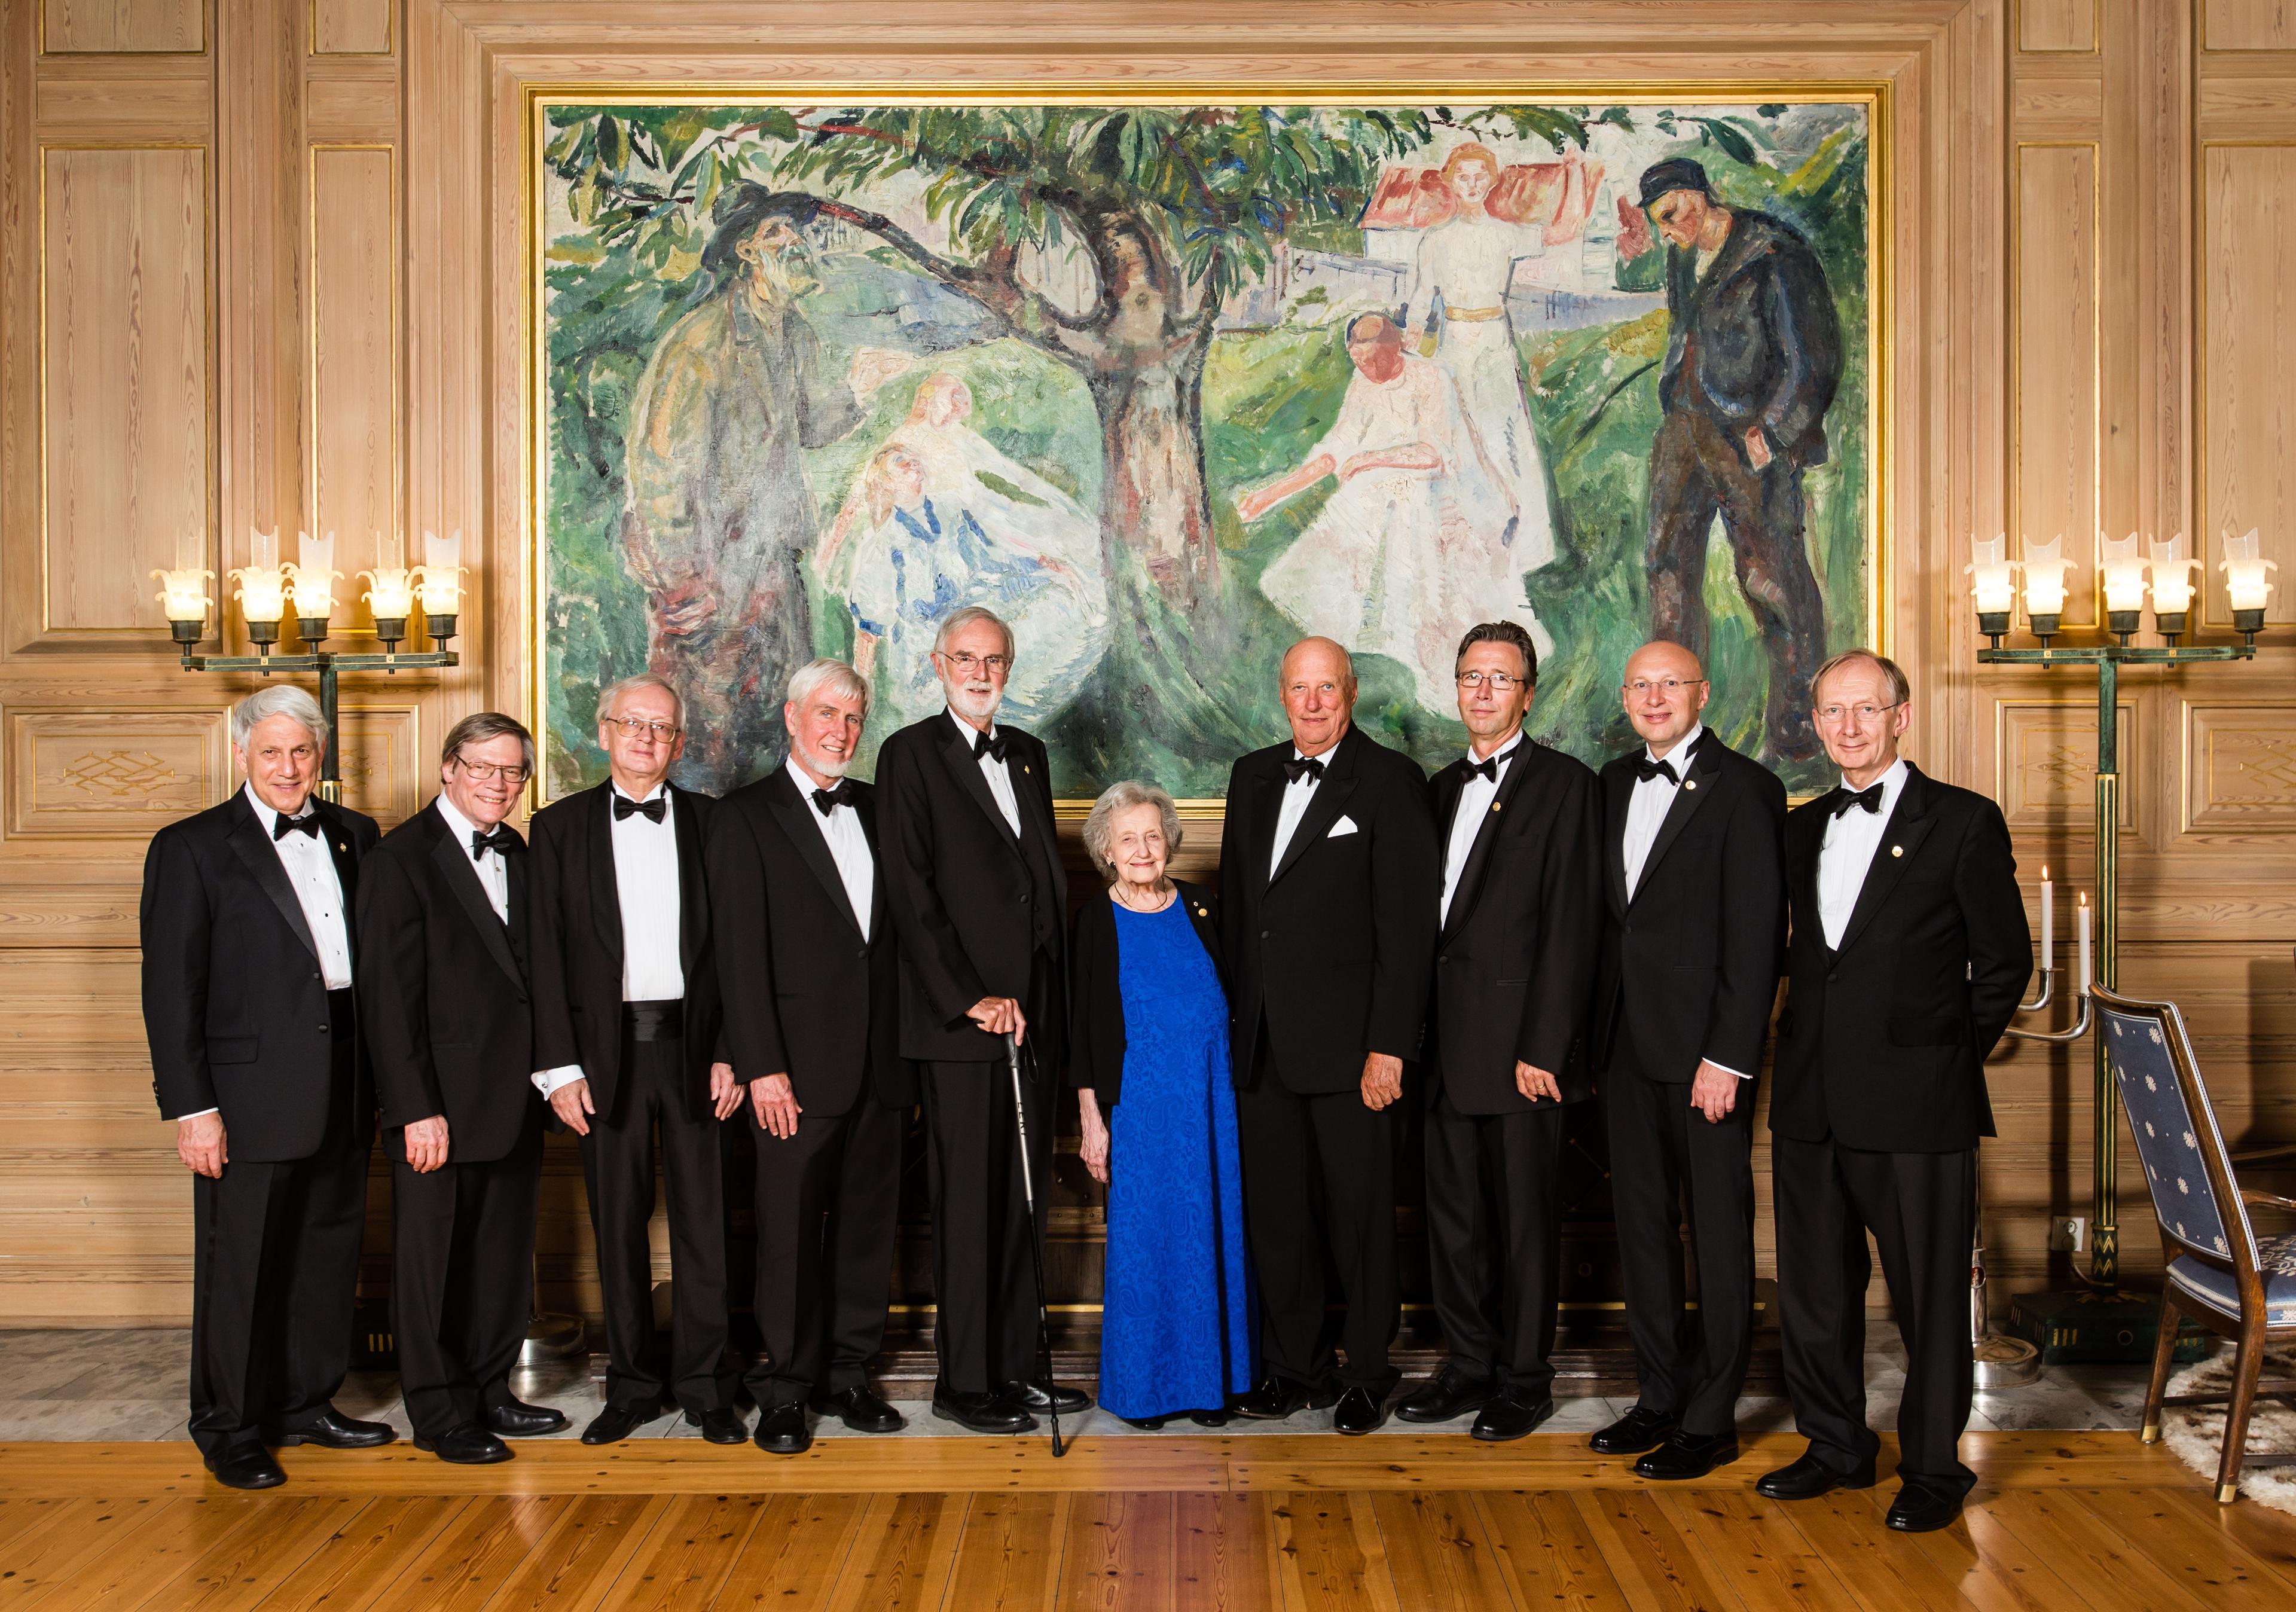 All the 2014 Kavli Prize laureates together with His Royal Highness King Harald in the Munch room at Oslo City Hall 